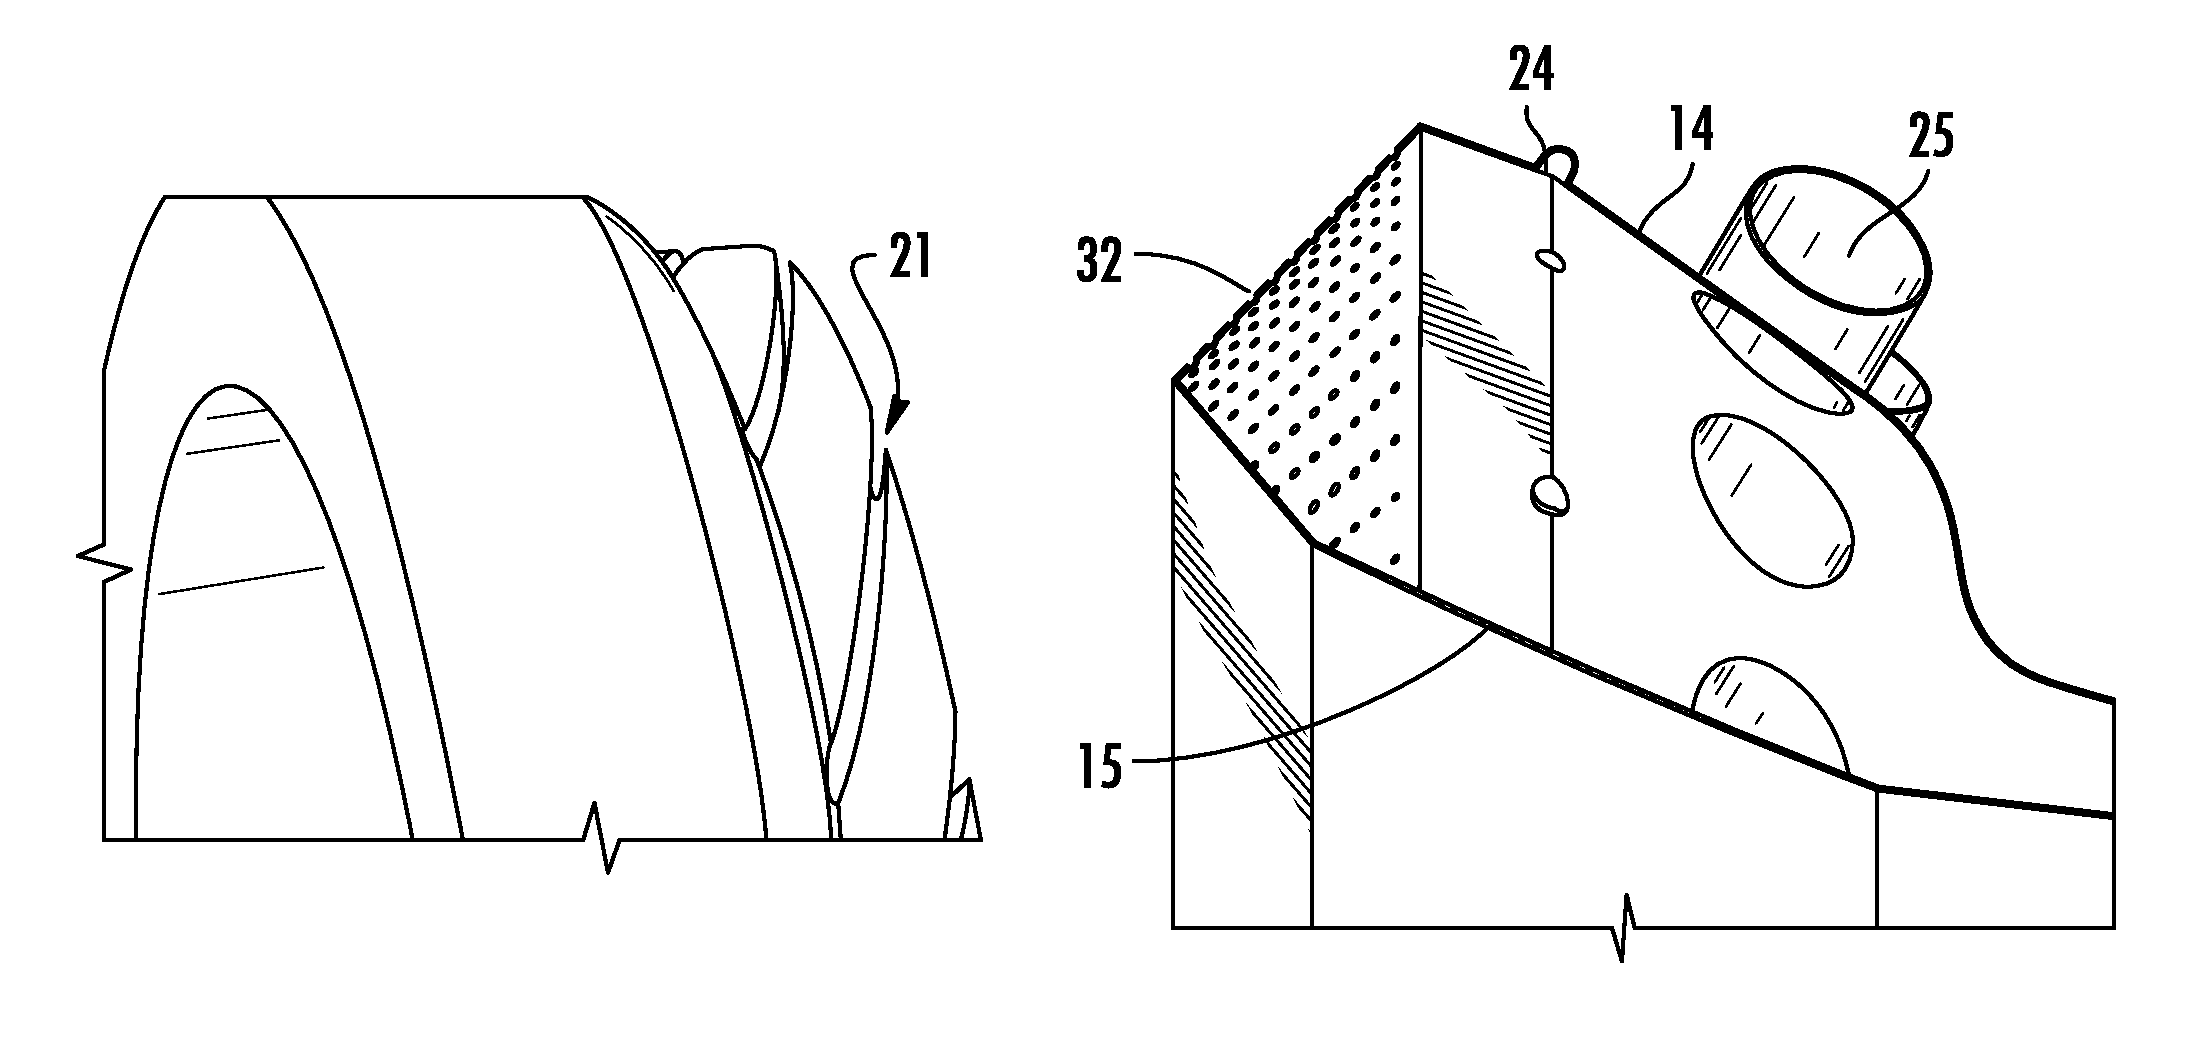 Tangential combustor with vaneless turbine for use on gas turbine engines